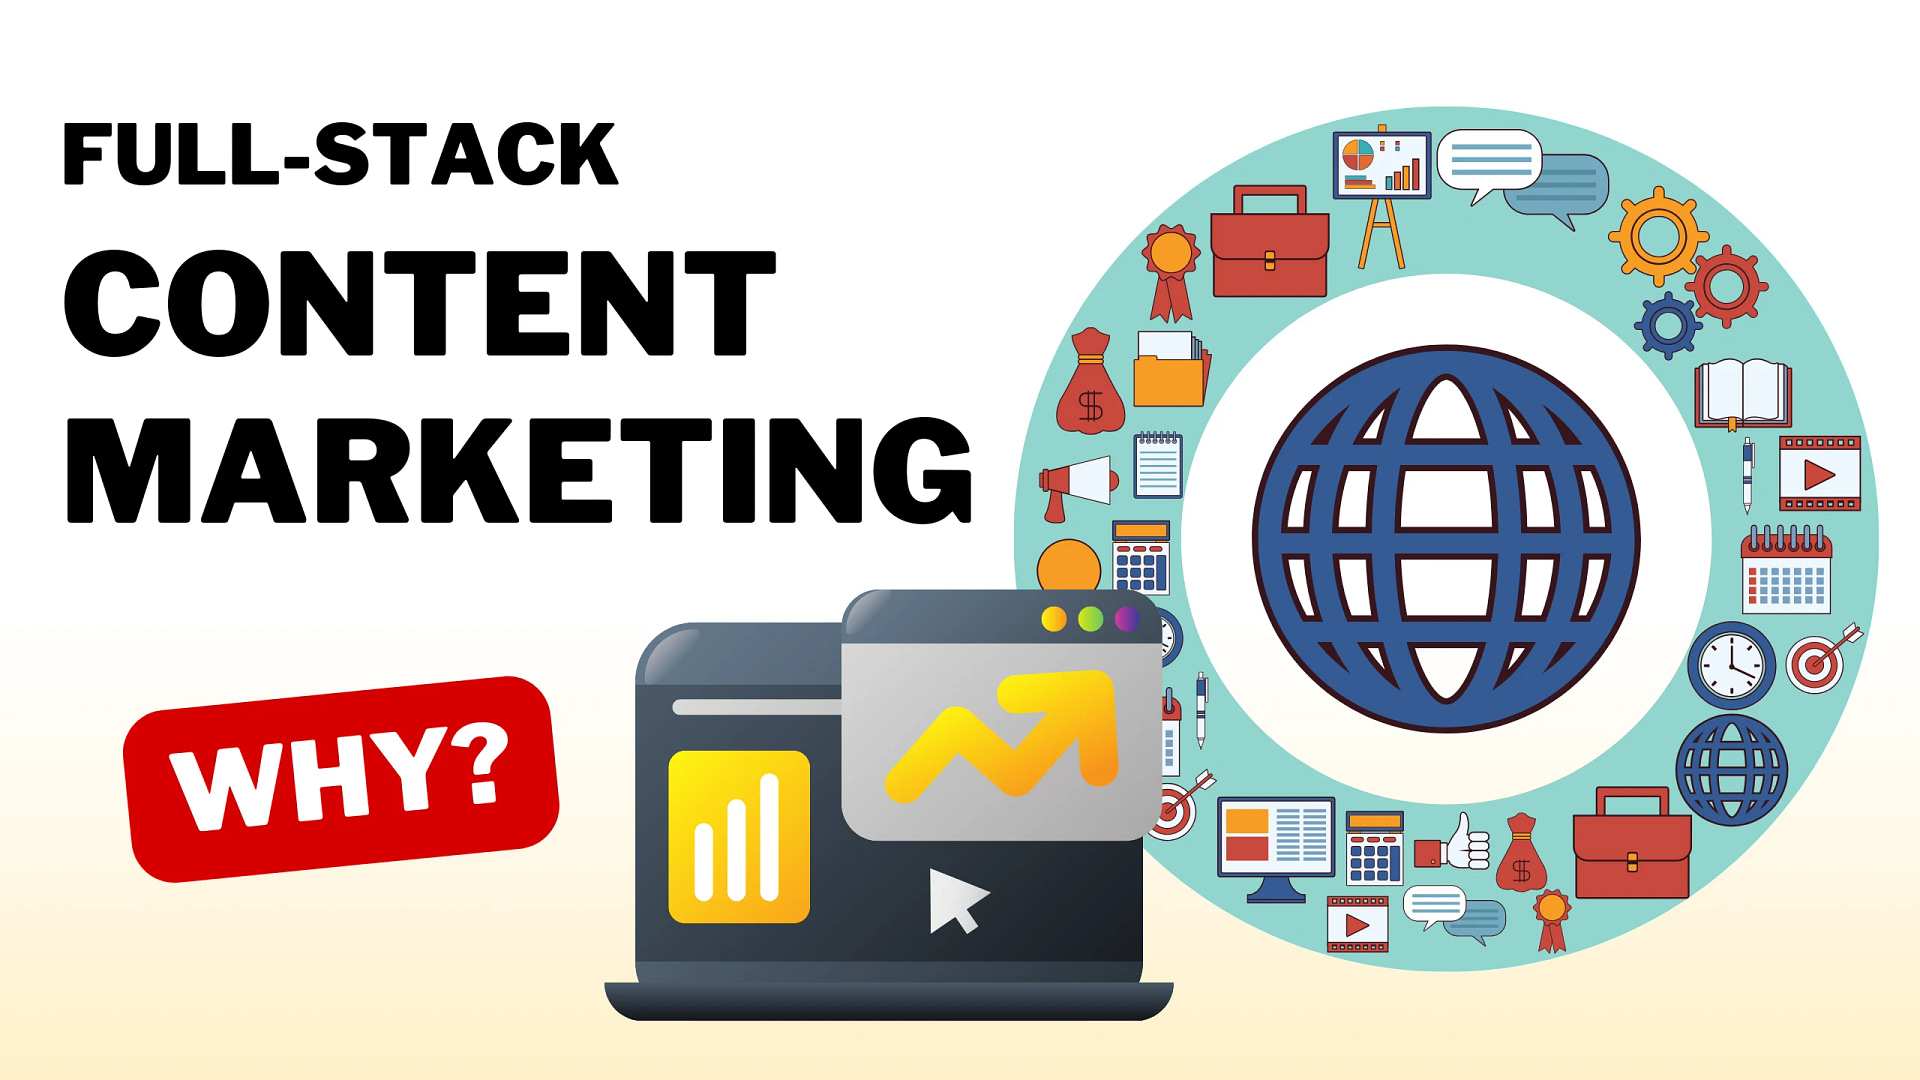 Full-stack Content Marketing: What you need to know